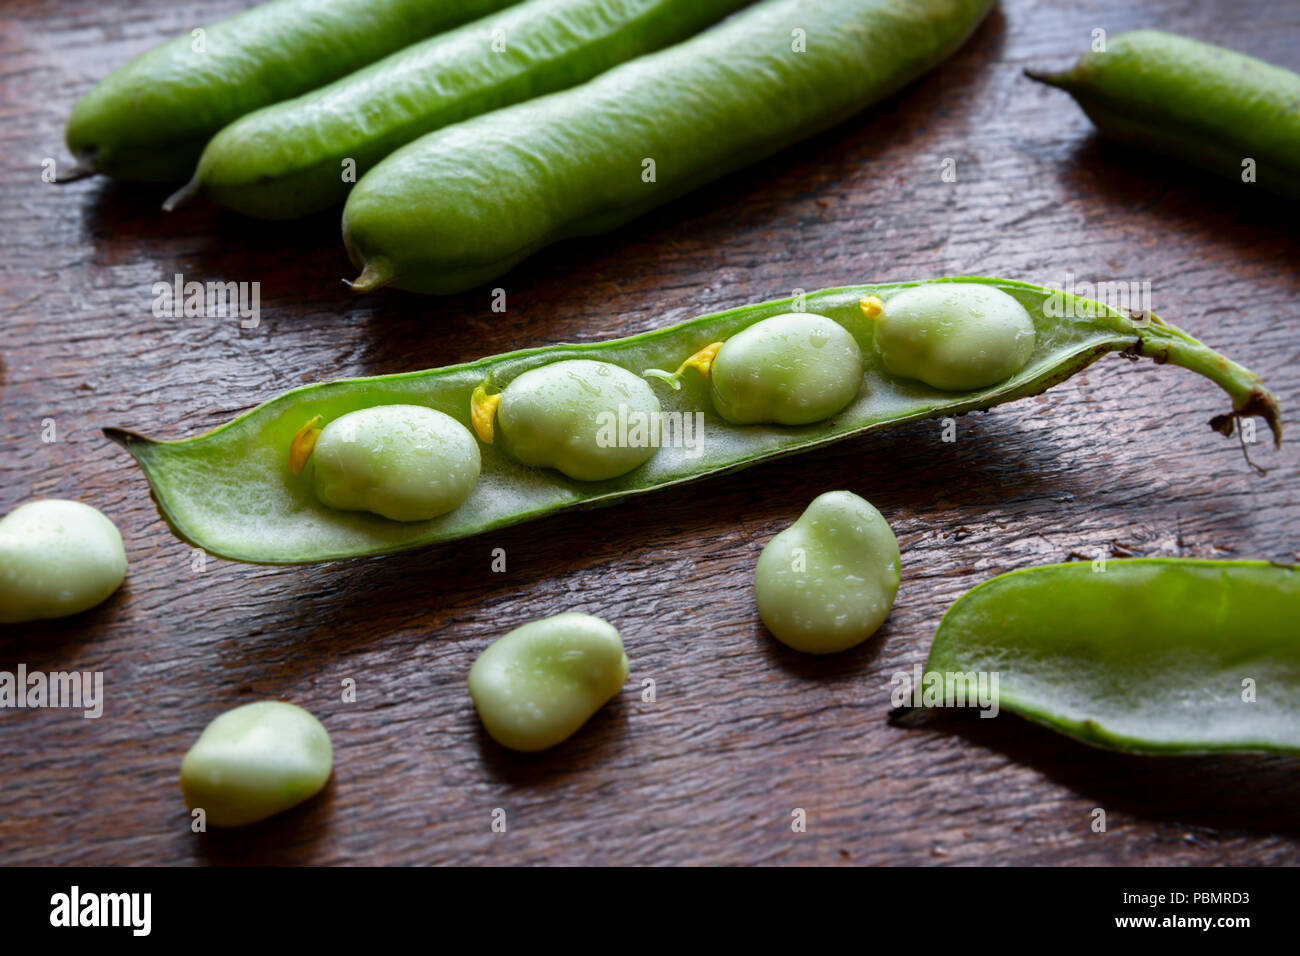 Feshly picked Broad Beans in their pod on a dark wooden kitchen table top Stock Photo